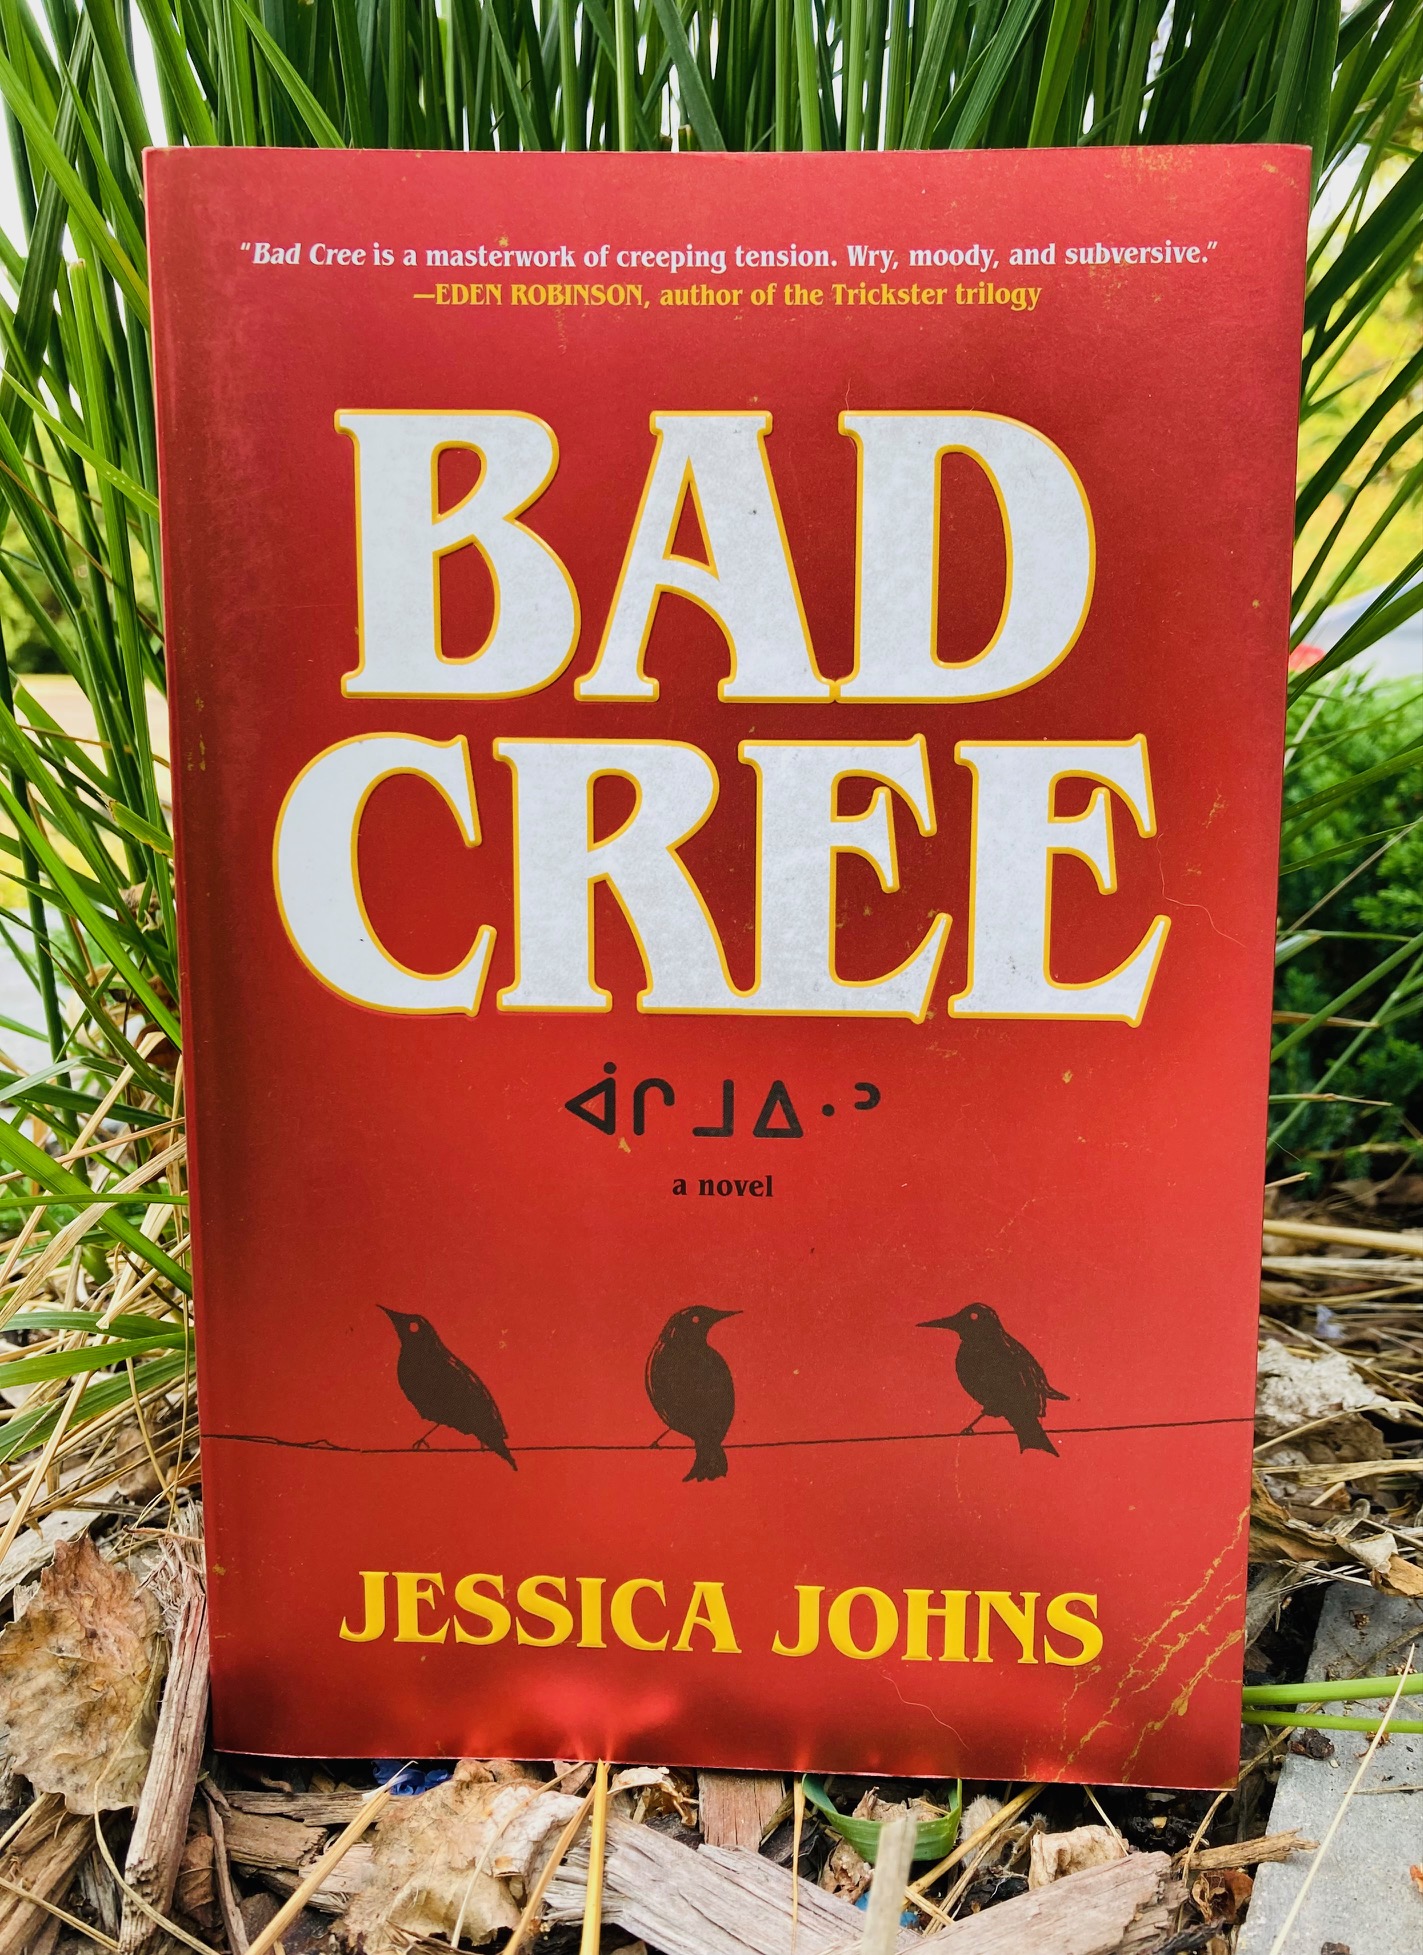 Bad Cree by Jessica Johns book pictured with green grass behind it